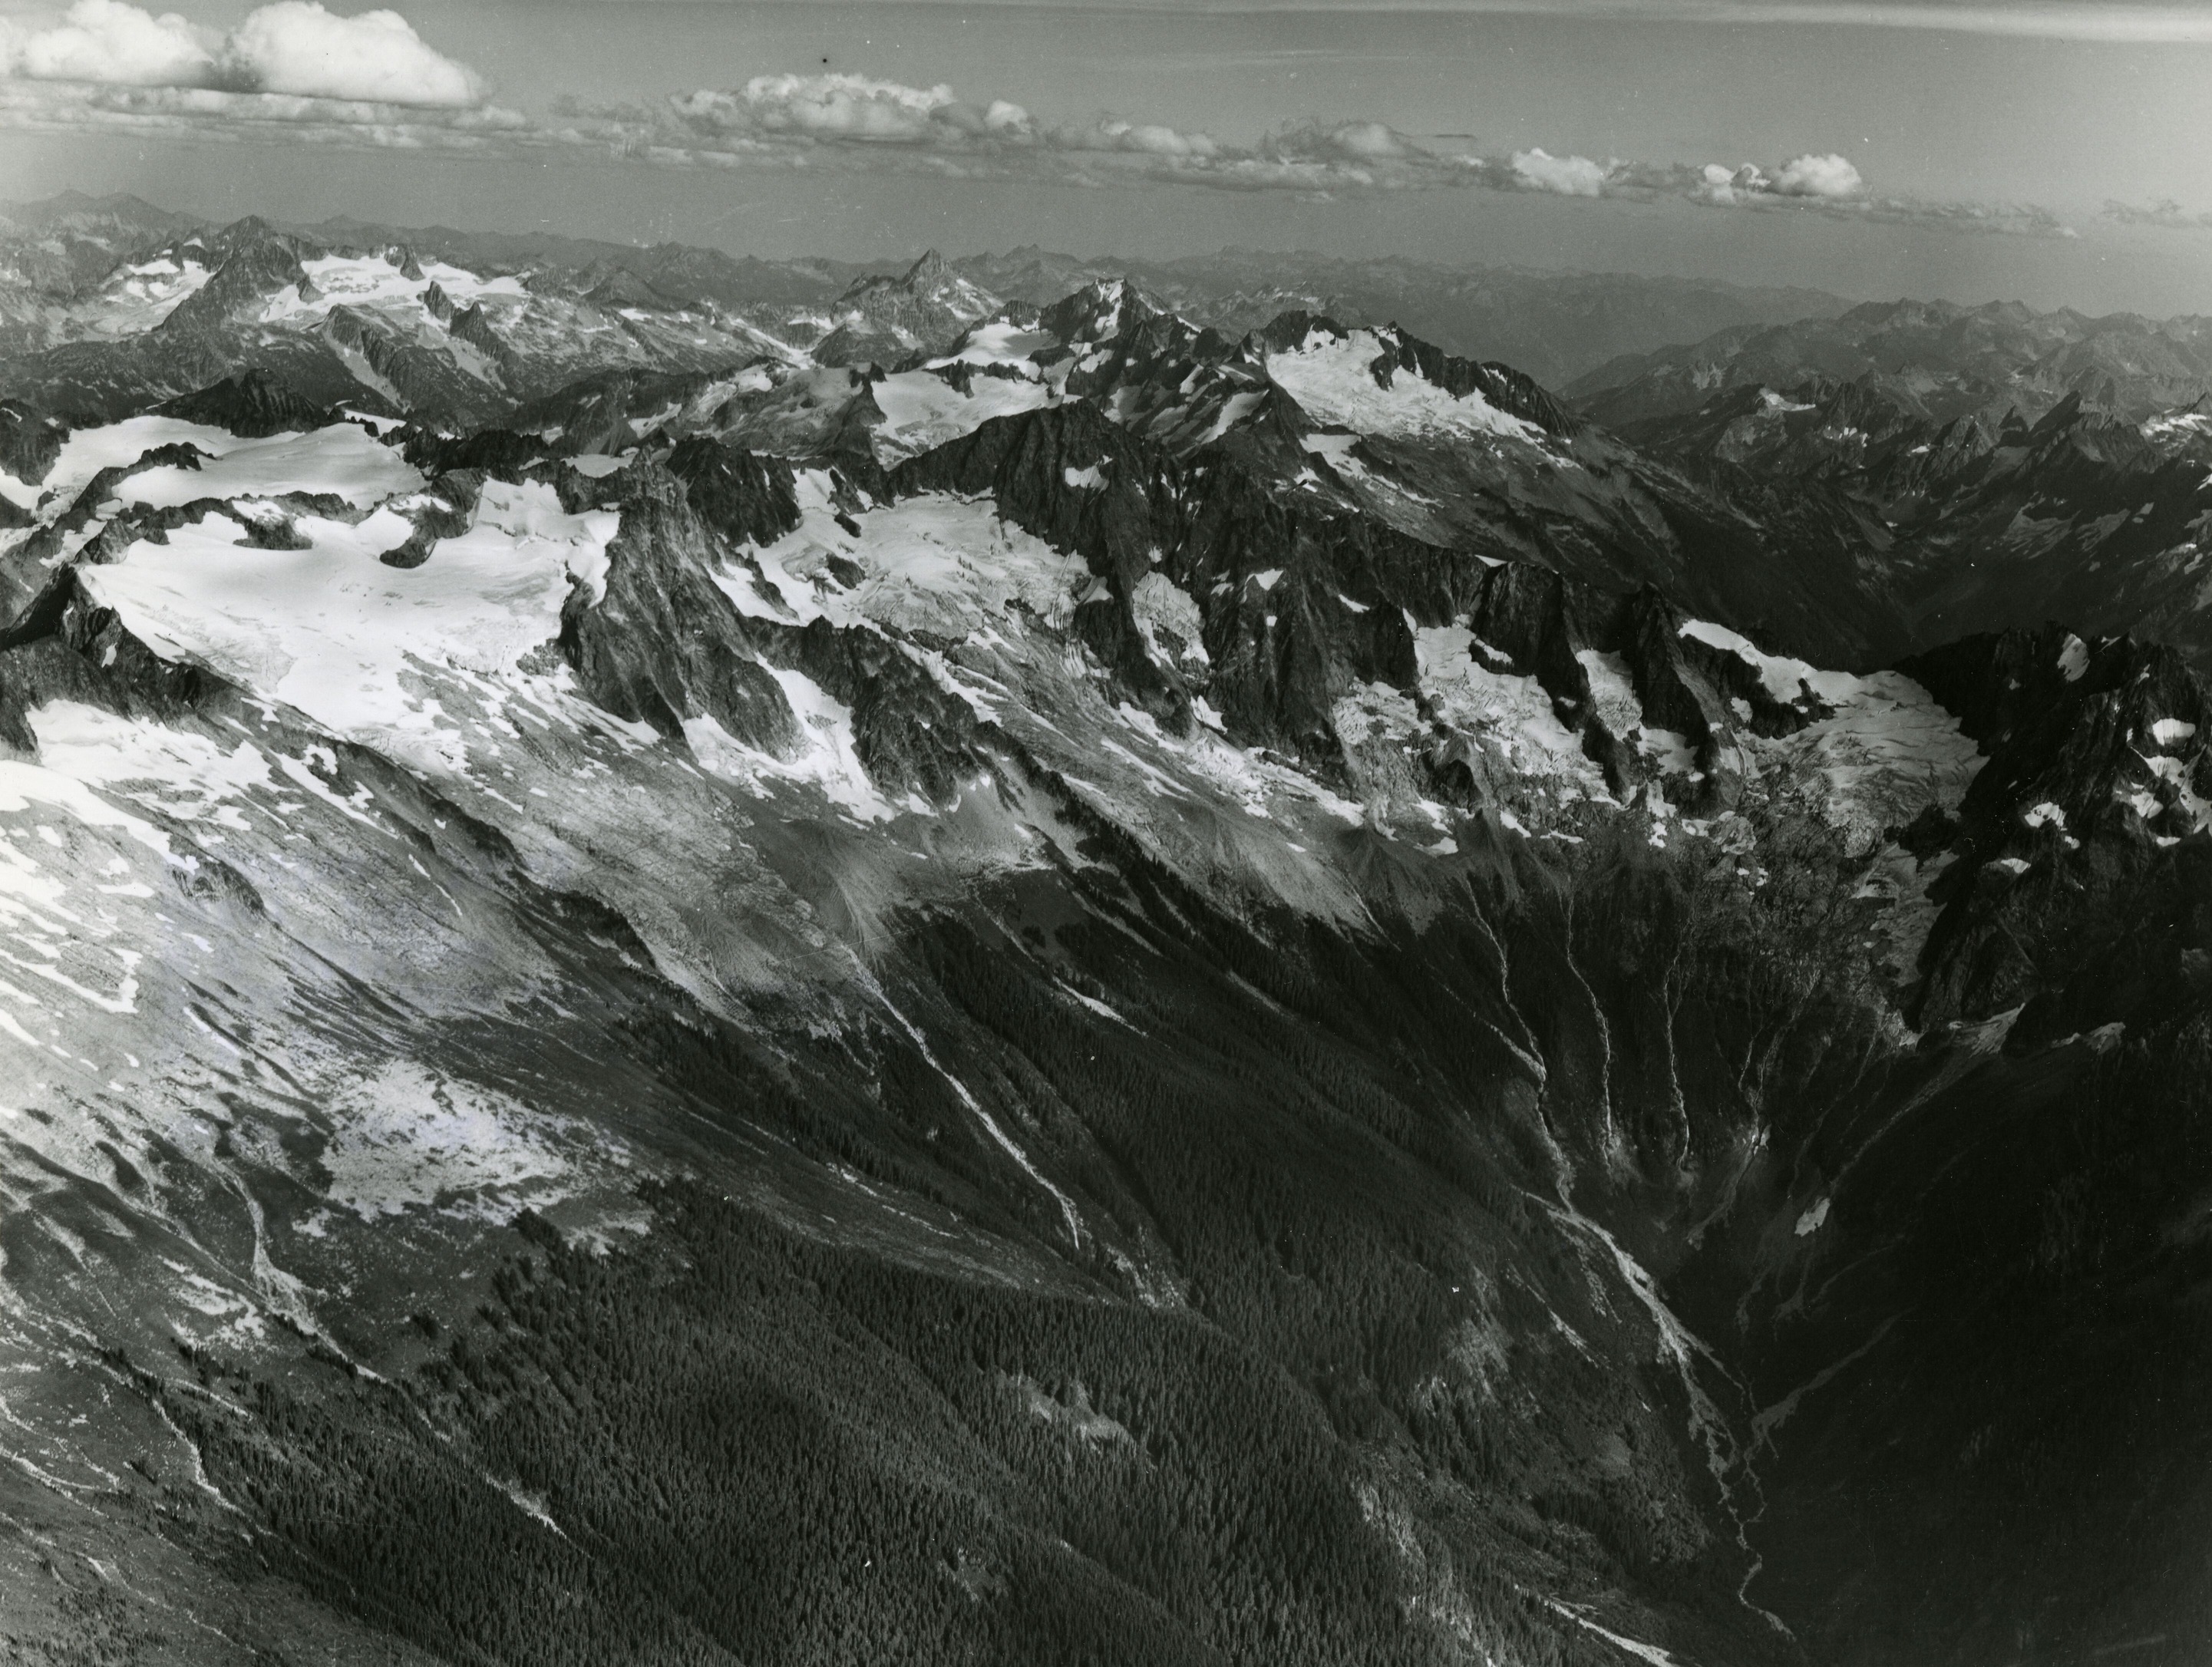 Aerial view of a mountain ridge. The peaks of the mountains are covered in glaciers. The bottom half of the mountains are forested. More mountain peaks can be seen in the background.